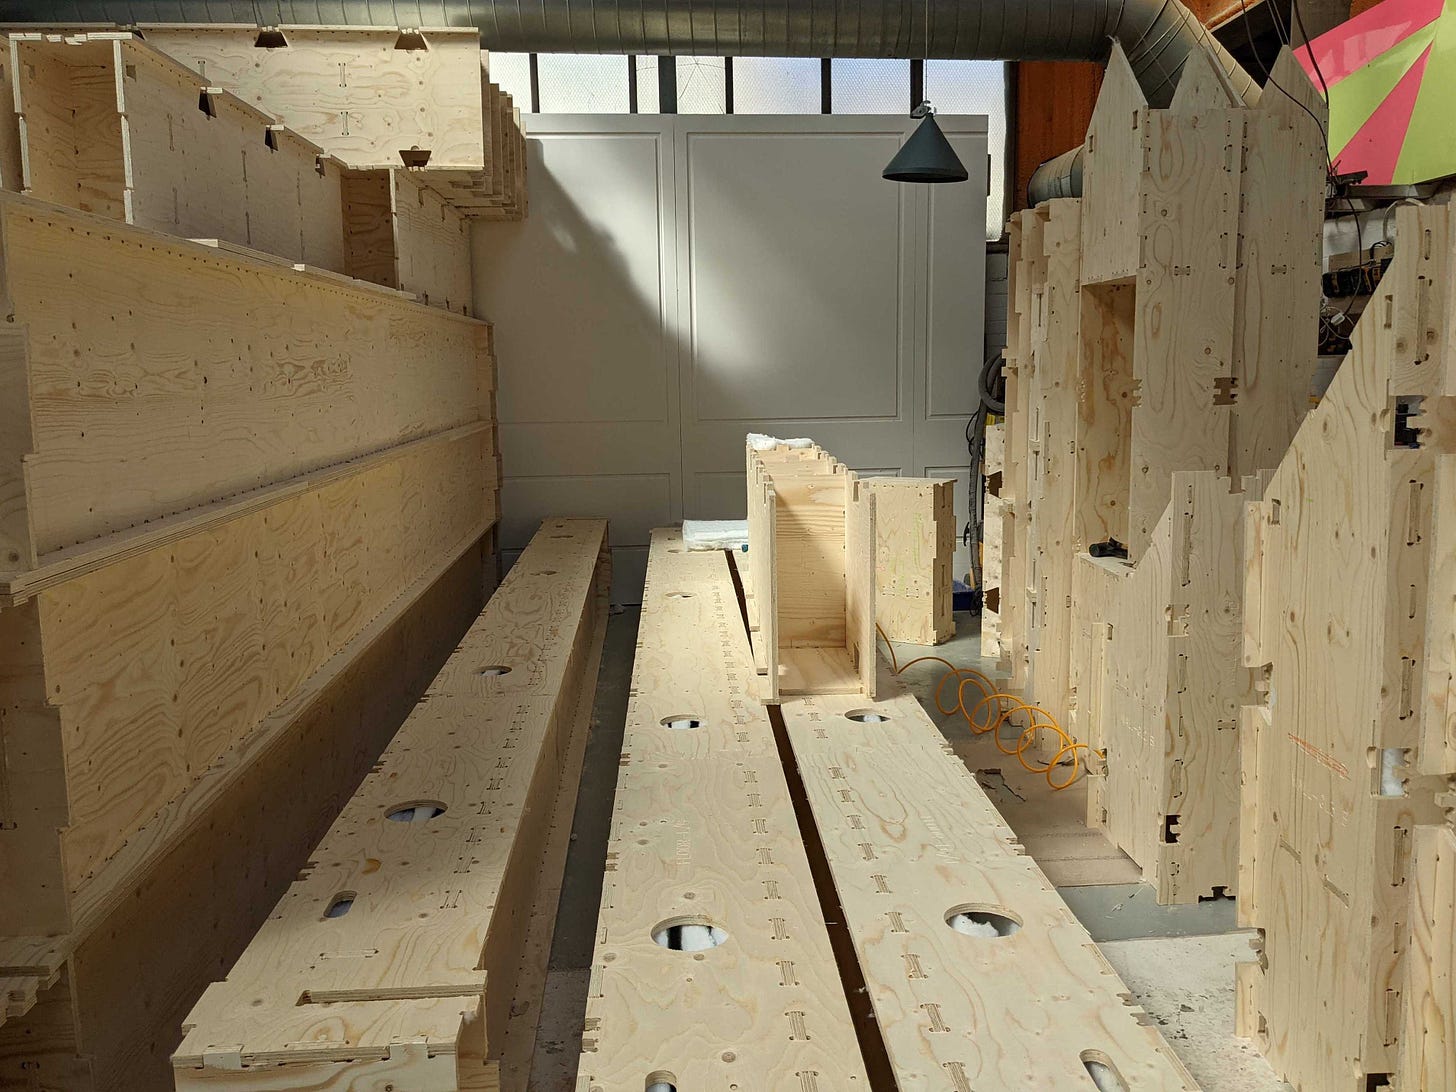 Various sizes of WikiHouse Skylark blocks are shown in a warehouse space